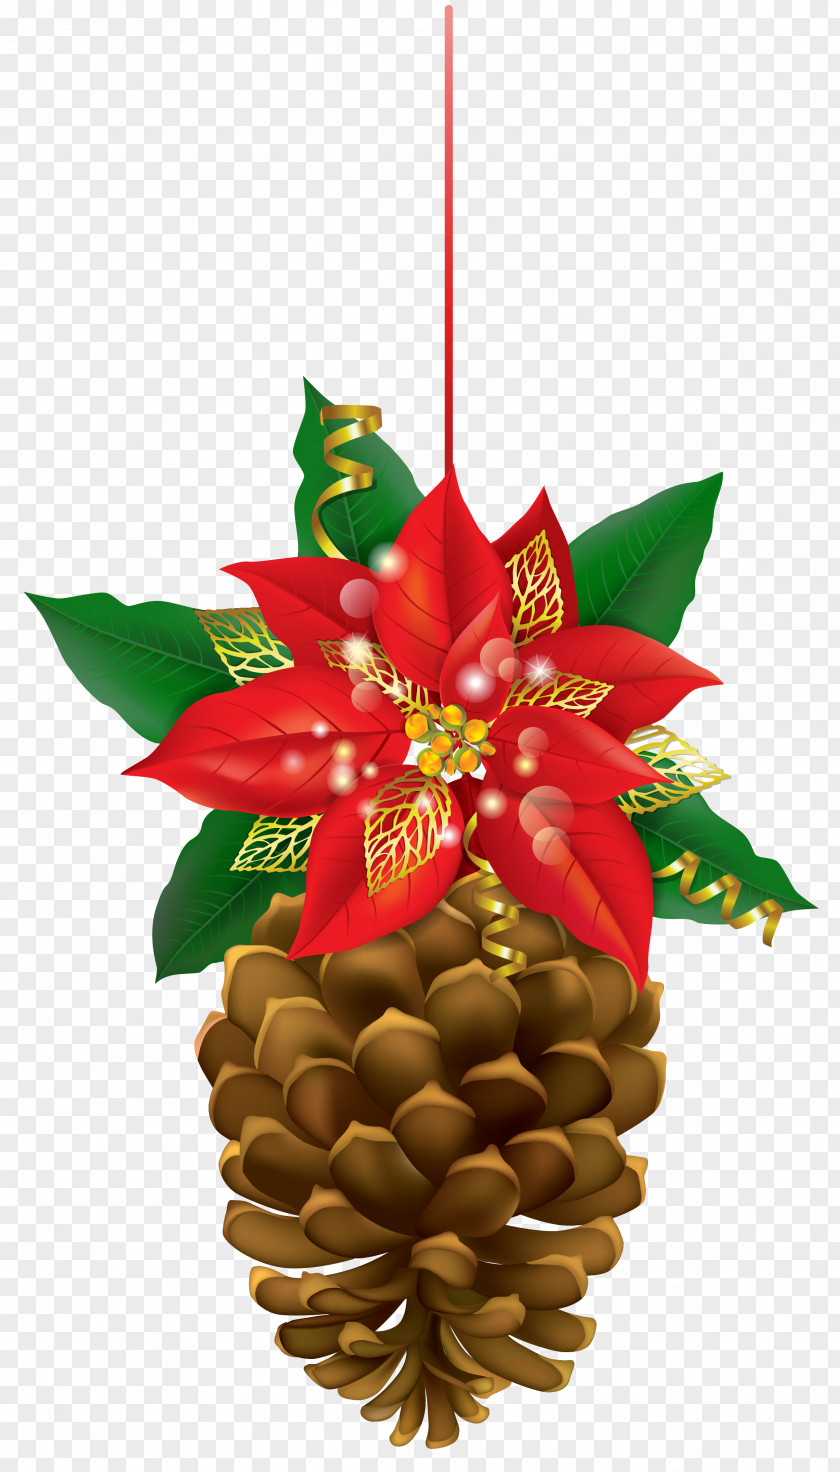 Christmas Pinecone With Poinsettia Clipart Image Clip Art PNG